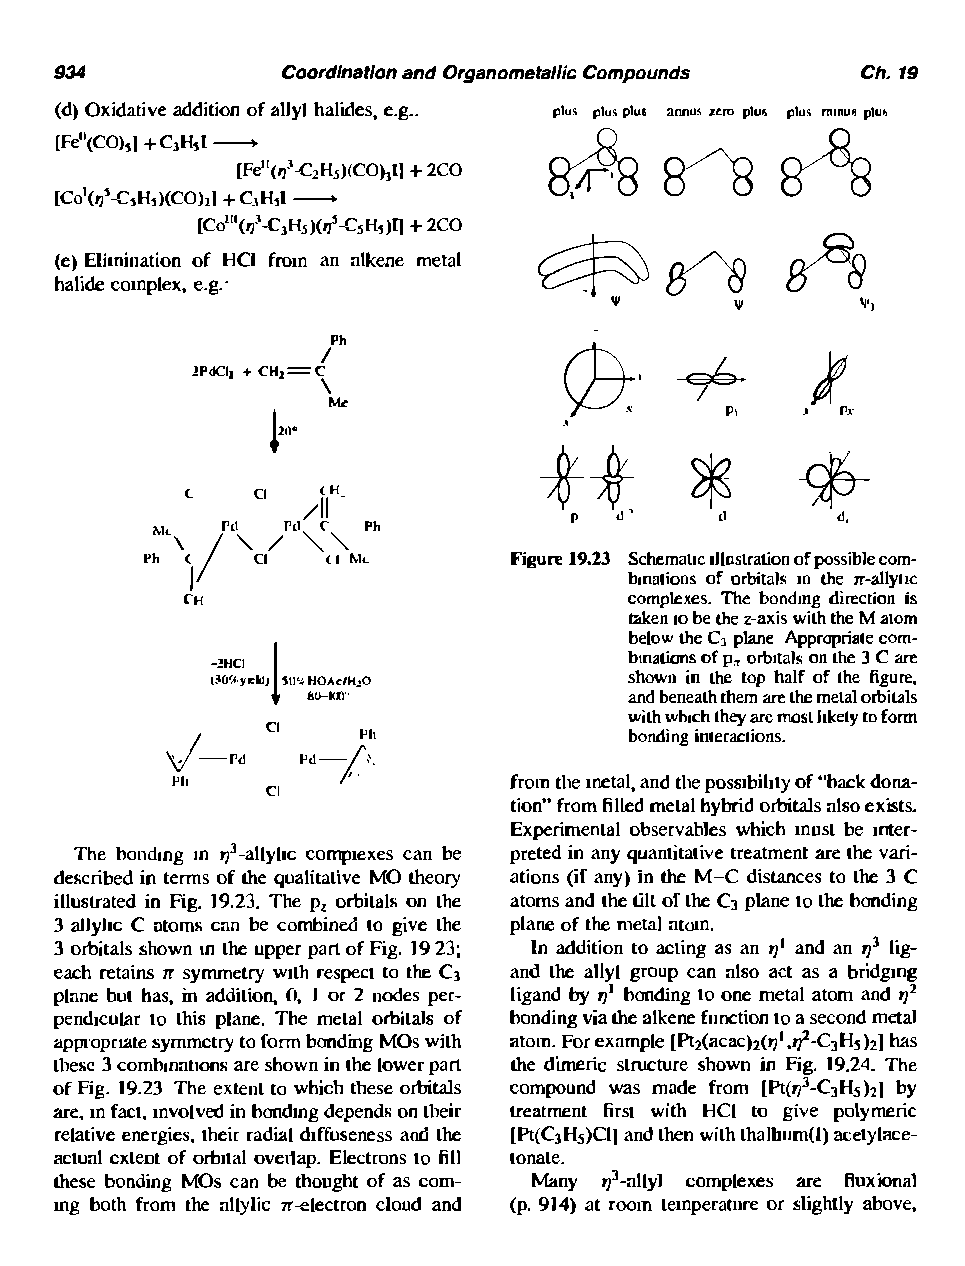 Figure 19.23 SchemalicillDslralionofpossiblecom-binplions of orbitals in the rr-allyiic complexes. The bonding dirccrion is taken lo be the z-axis with the M aiom below the Cj plane Approprisle combinations of p, orbitals on the 3 C arc shown in the top half of Ihe figure, and beneath them are the metal orbitals with which Ihey arc mosl likely to form bonding inieraciions.